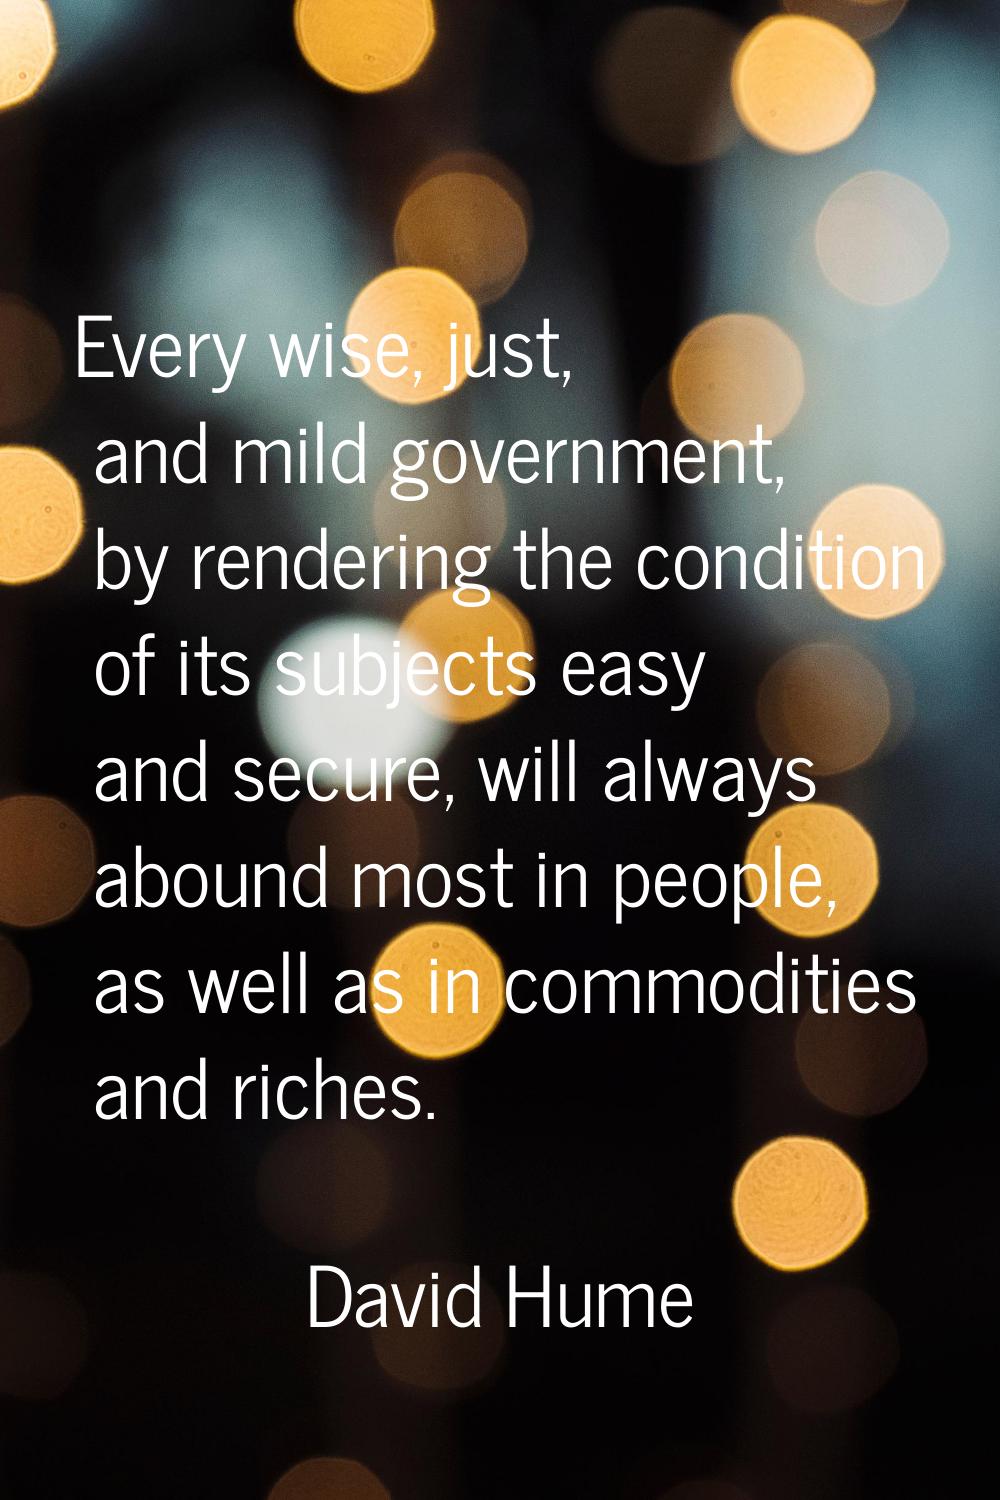 Every wise, just, and mild government, by rendering the condition of its subjects easy and secure, 